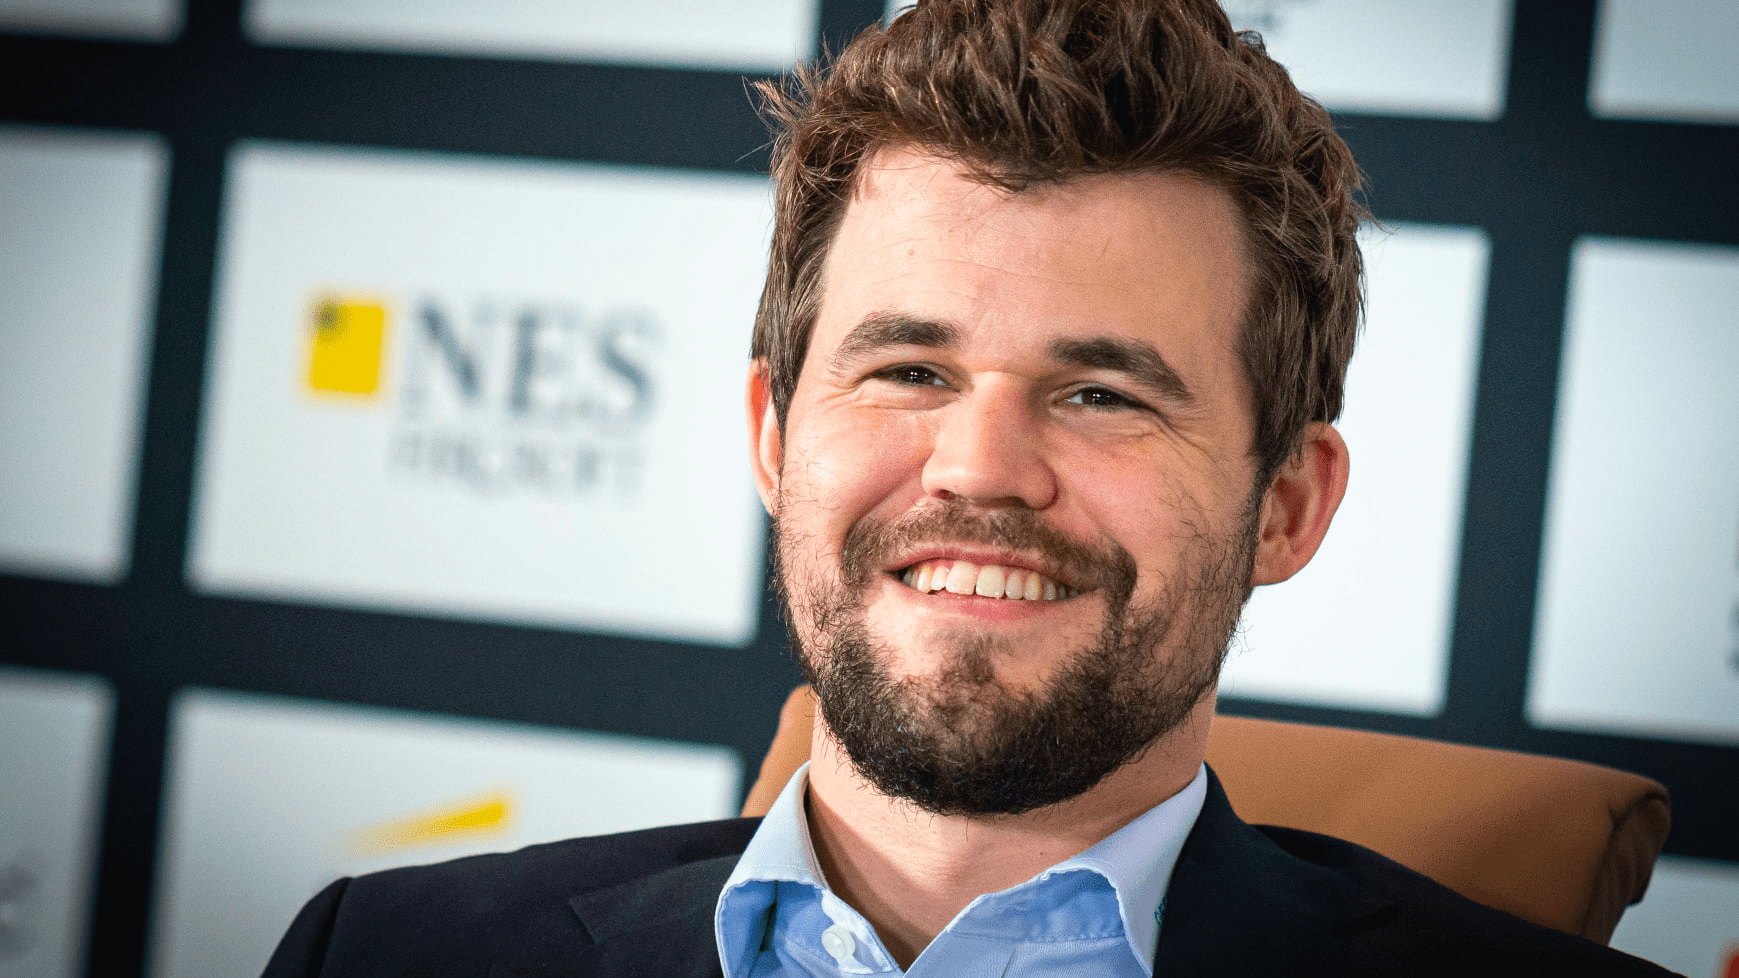 FIDE - International Chess Federation - World champion Magnus Carlsen turns  28 today, on November 30. Norwegian player has set many records during his  ongoing career. His peak rating of 2882, achieved